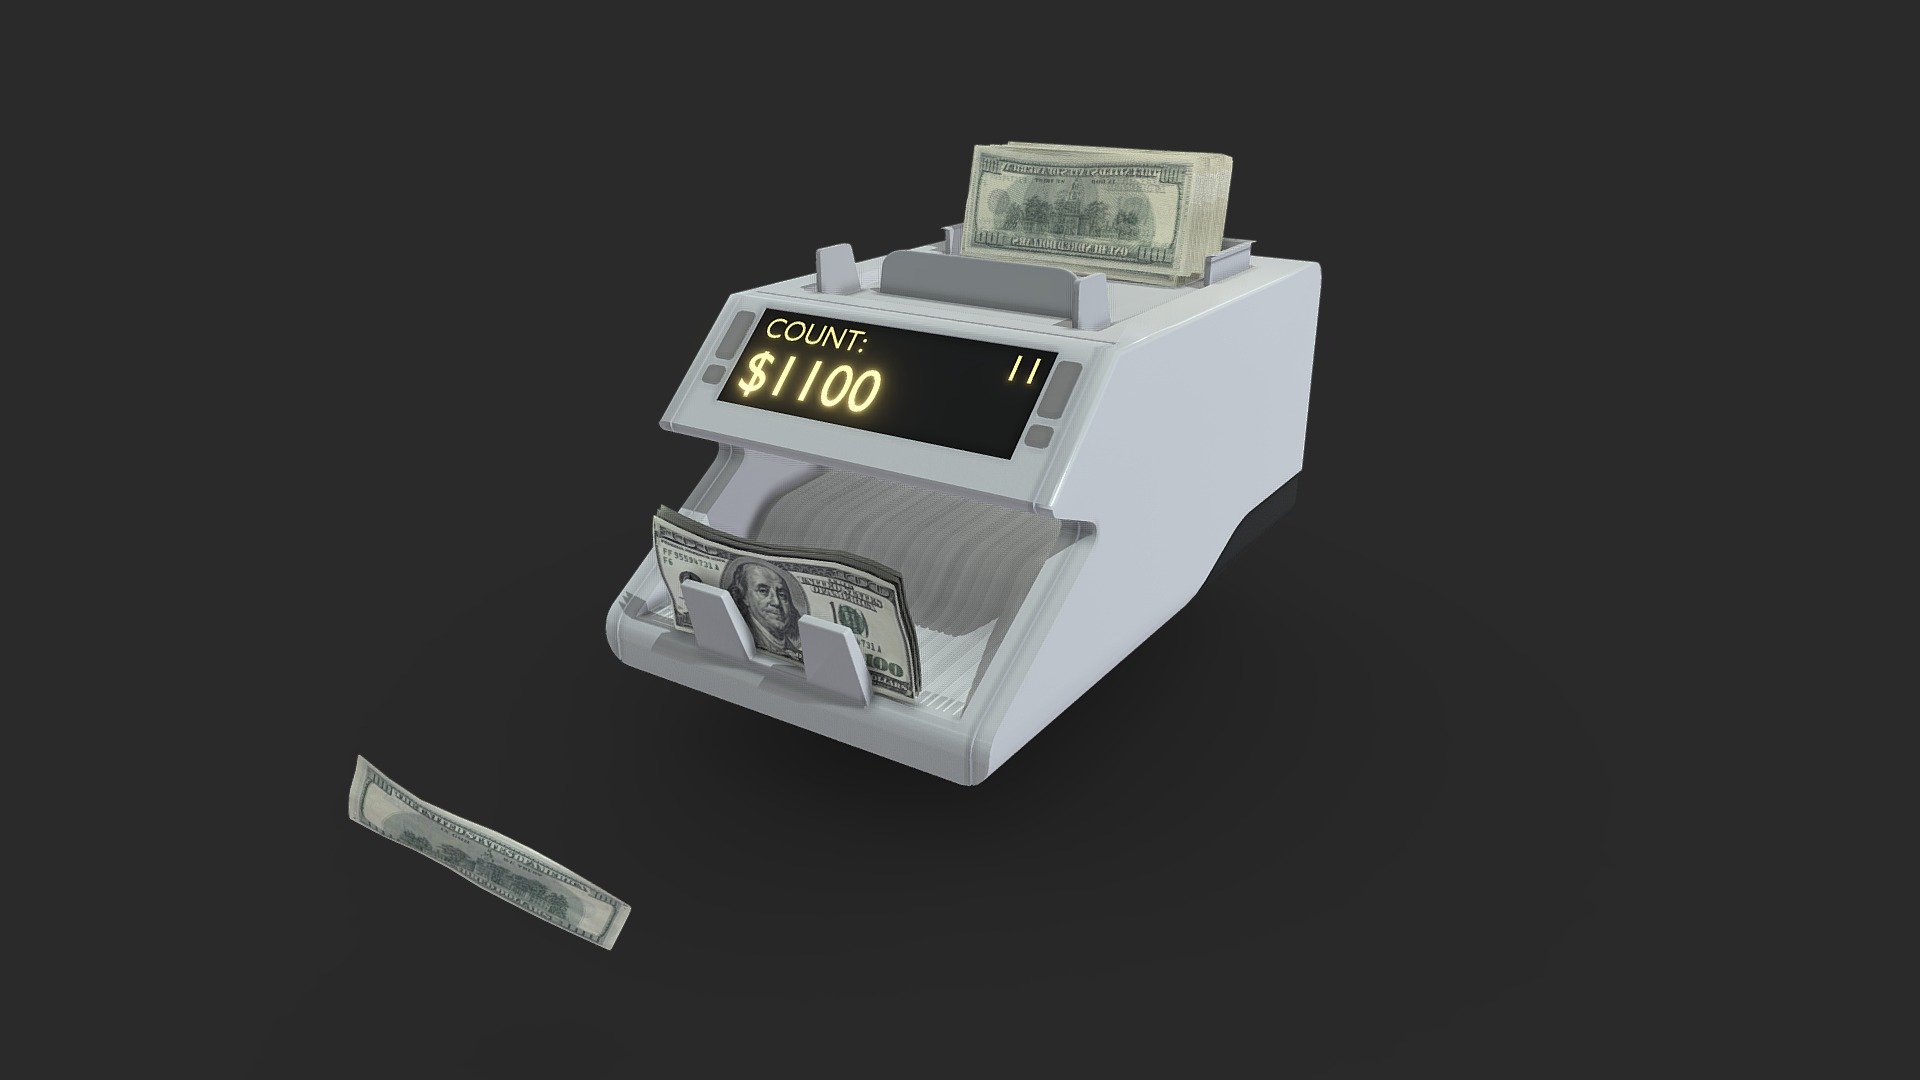 Highpoly Money Counter with Animated Money flow and money counter using Geonodes.
Easy to use! 

Video preview : https://twitter.com/unreal_designer/status/1540281353446359043?s=20&amp;t=3zrriPuIU9uerd1suayUCw

NOTE : Sketchfab does not support nodes, so you will not see the money flow or the counter moving but it is packed in the .blend

PBR ready. Feel free to reuse the geometry node groups for other applications 3d model